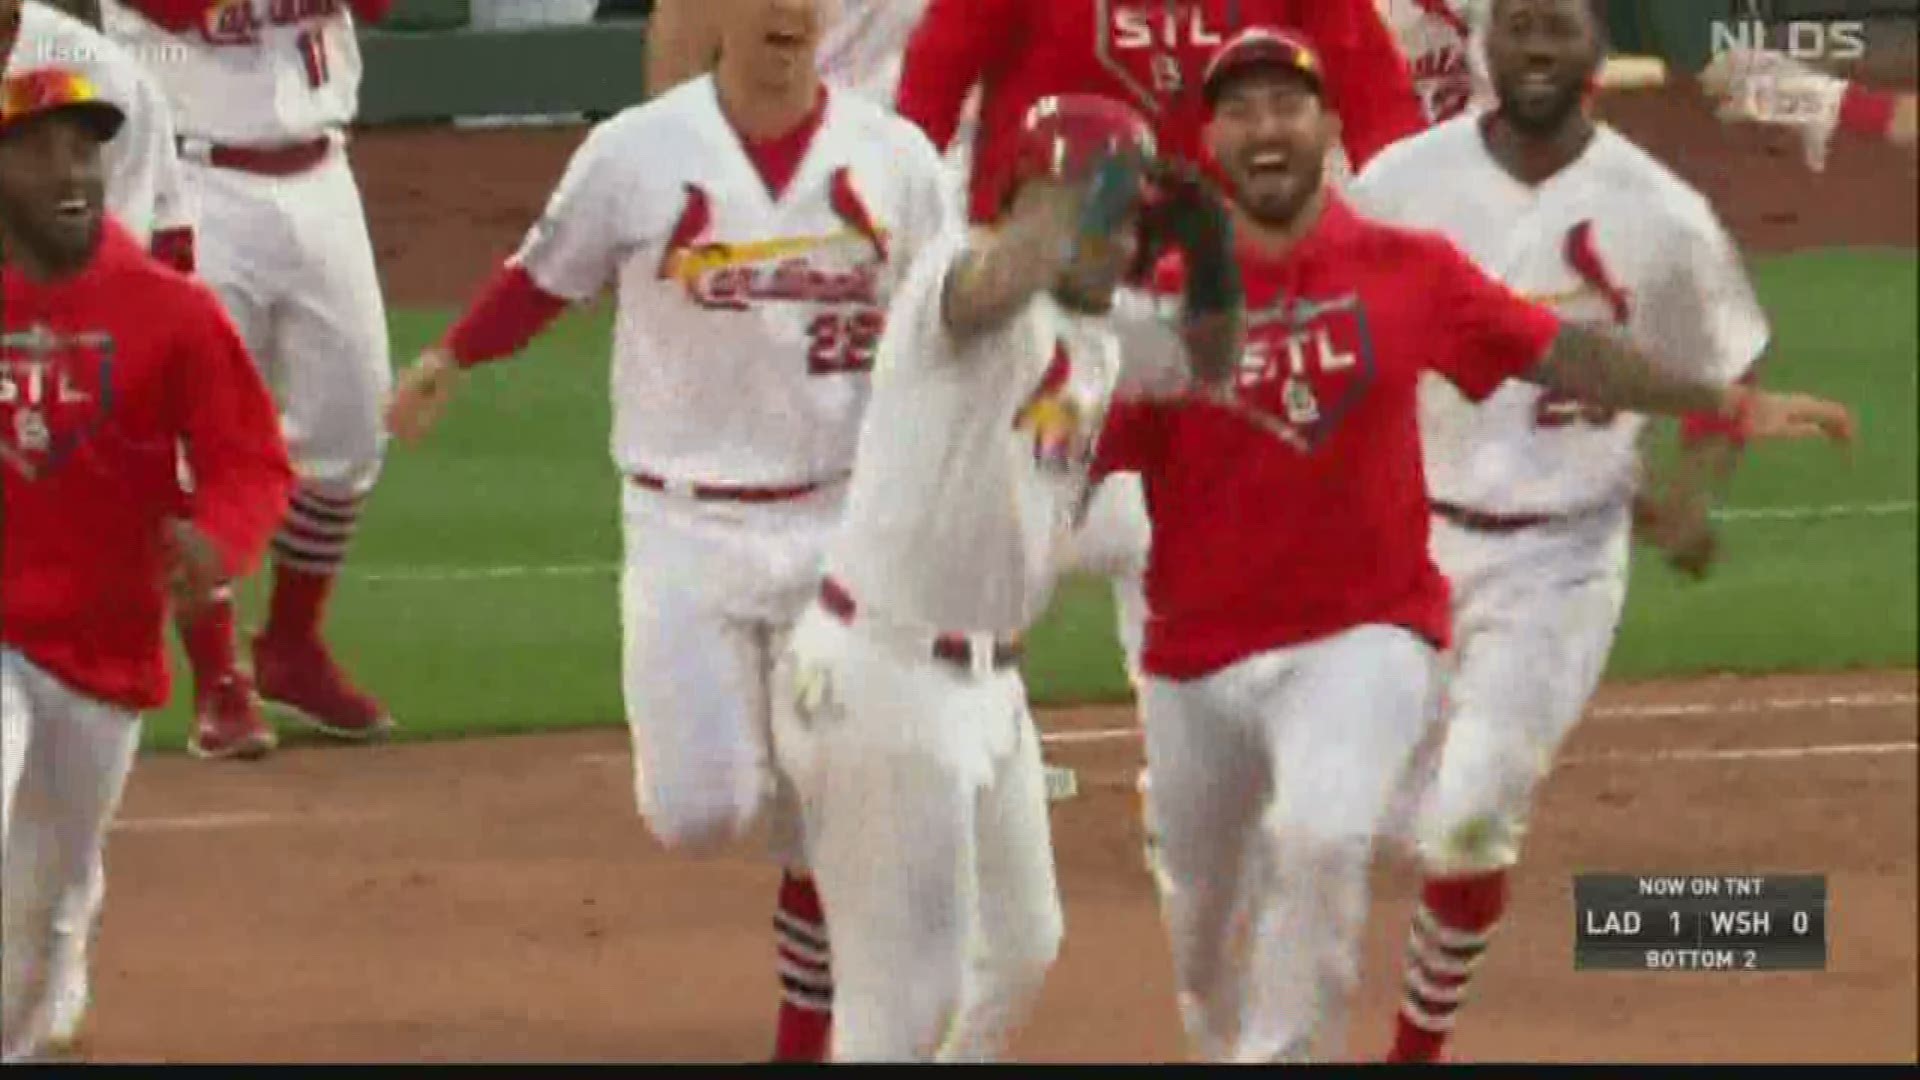 Yadi delivered the game-winning run, but everyone at Busch Stadium said they did a little bit to help.